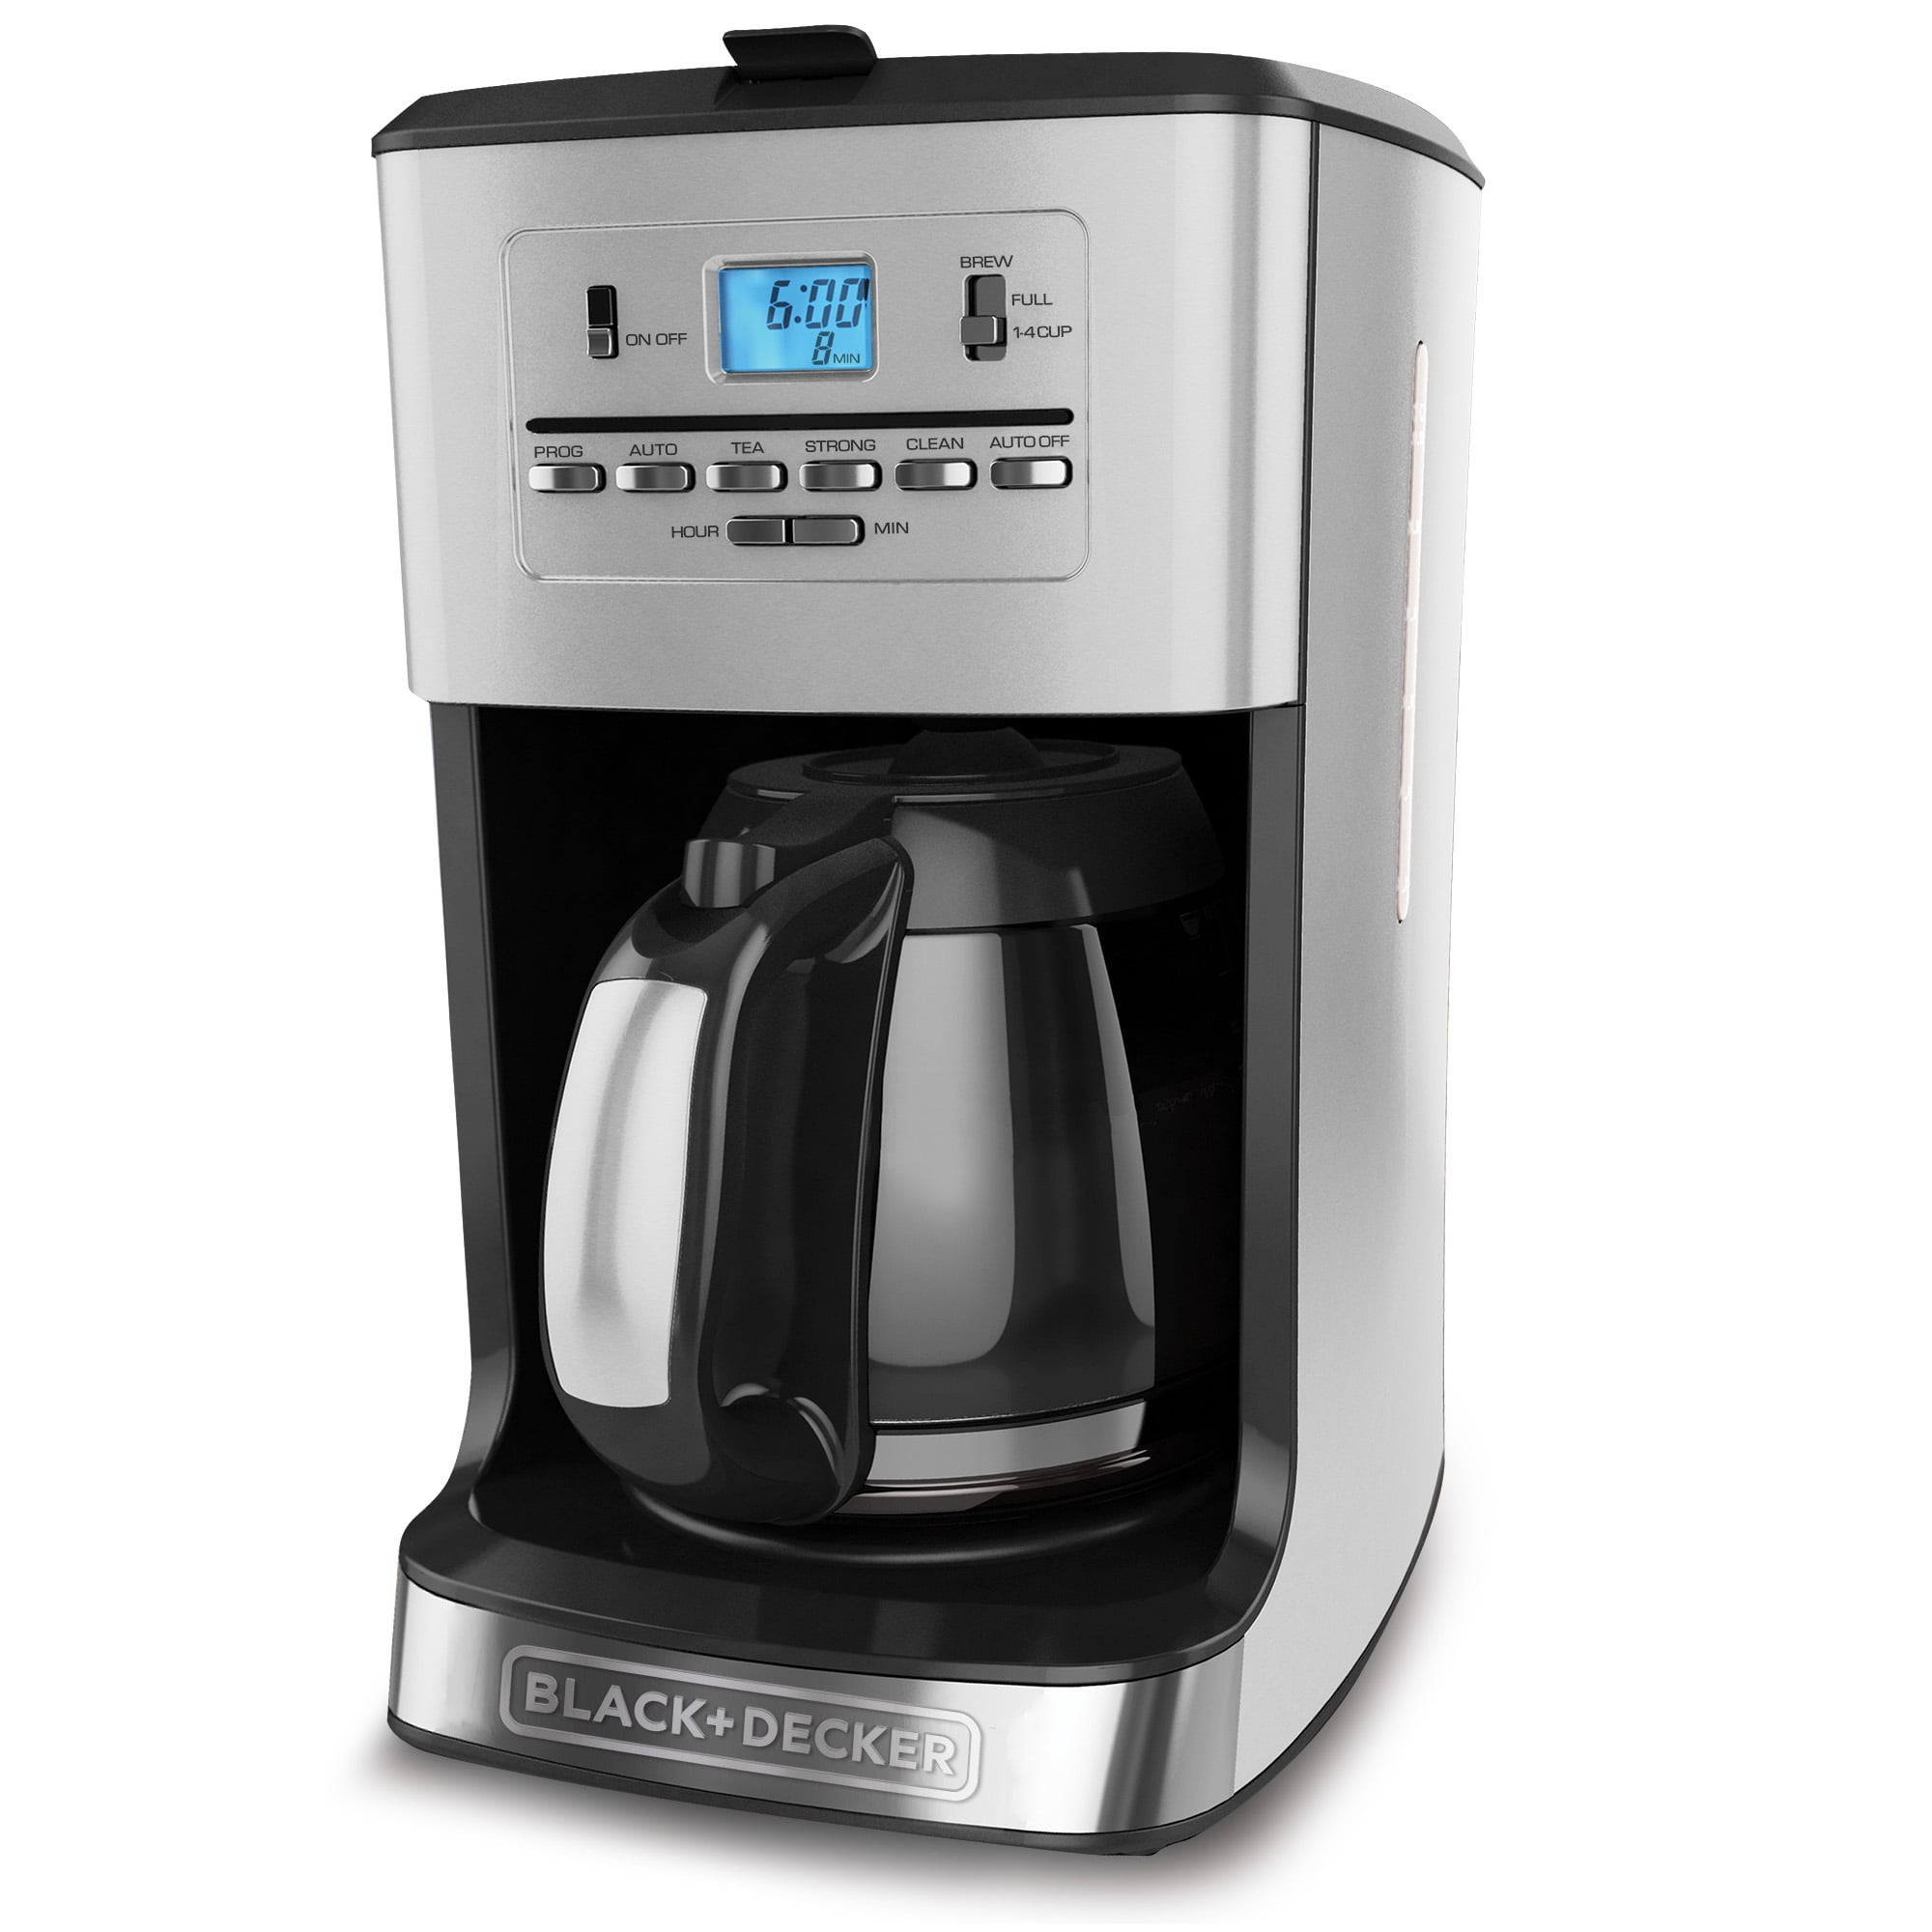 Daewoo DCM-1875 12-Cup 220 Volt Coffee Maker with Timer & Display